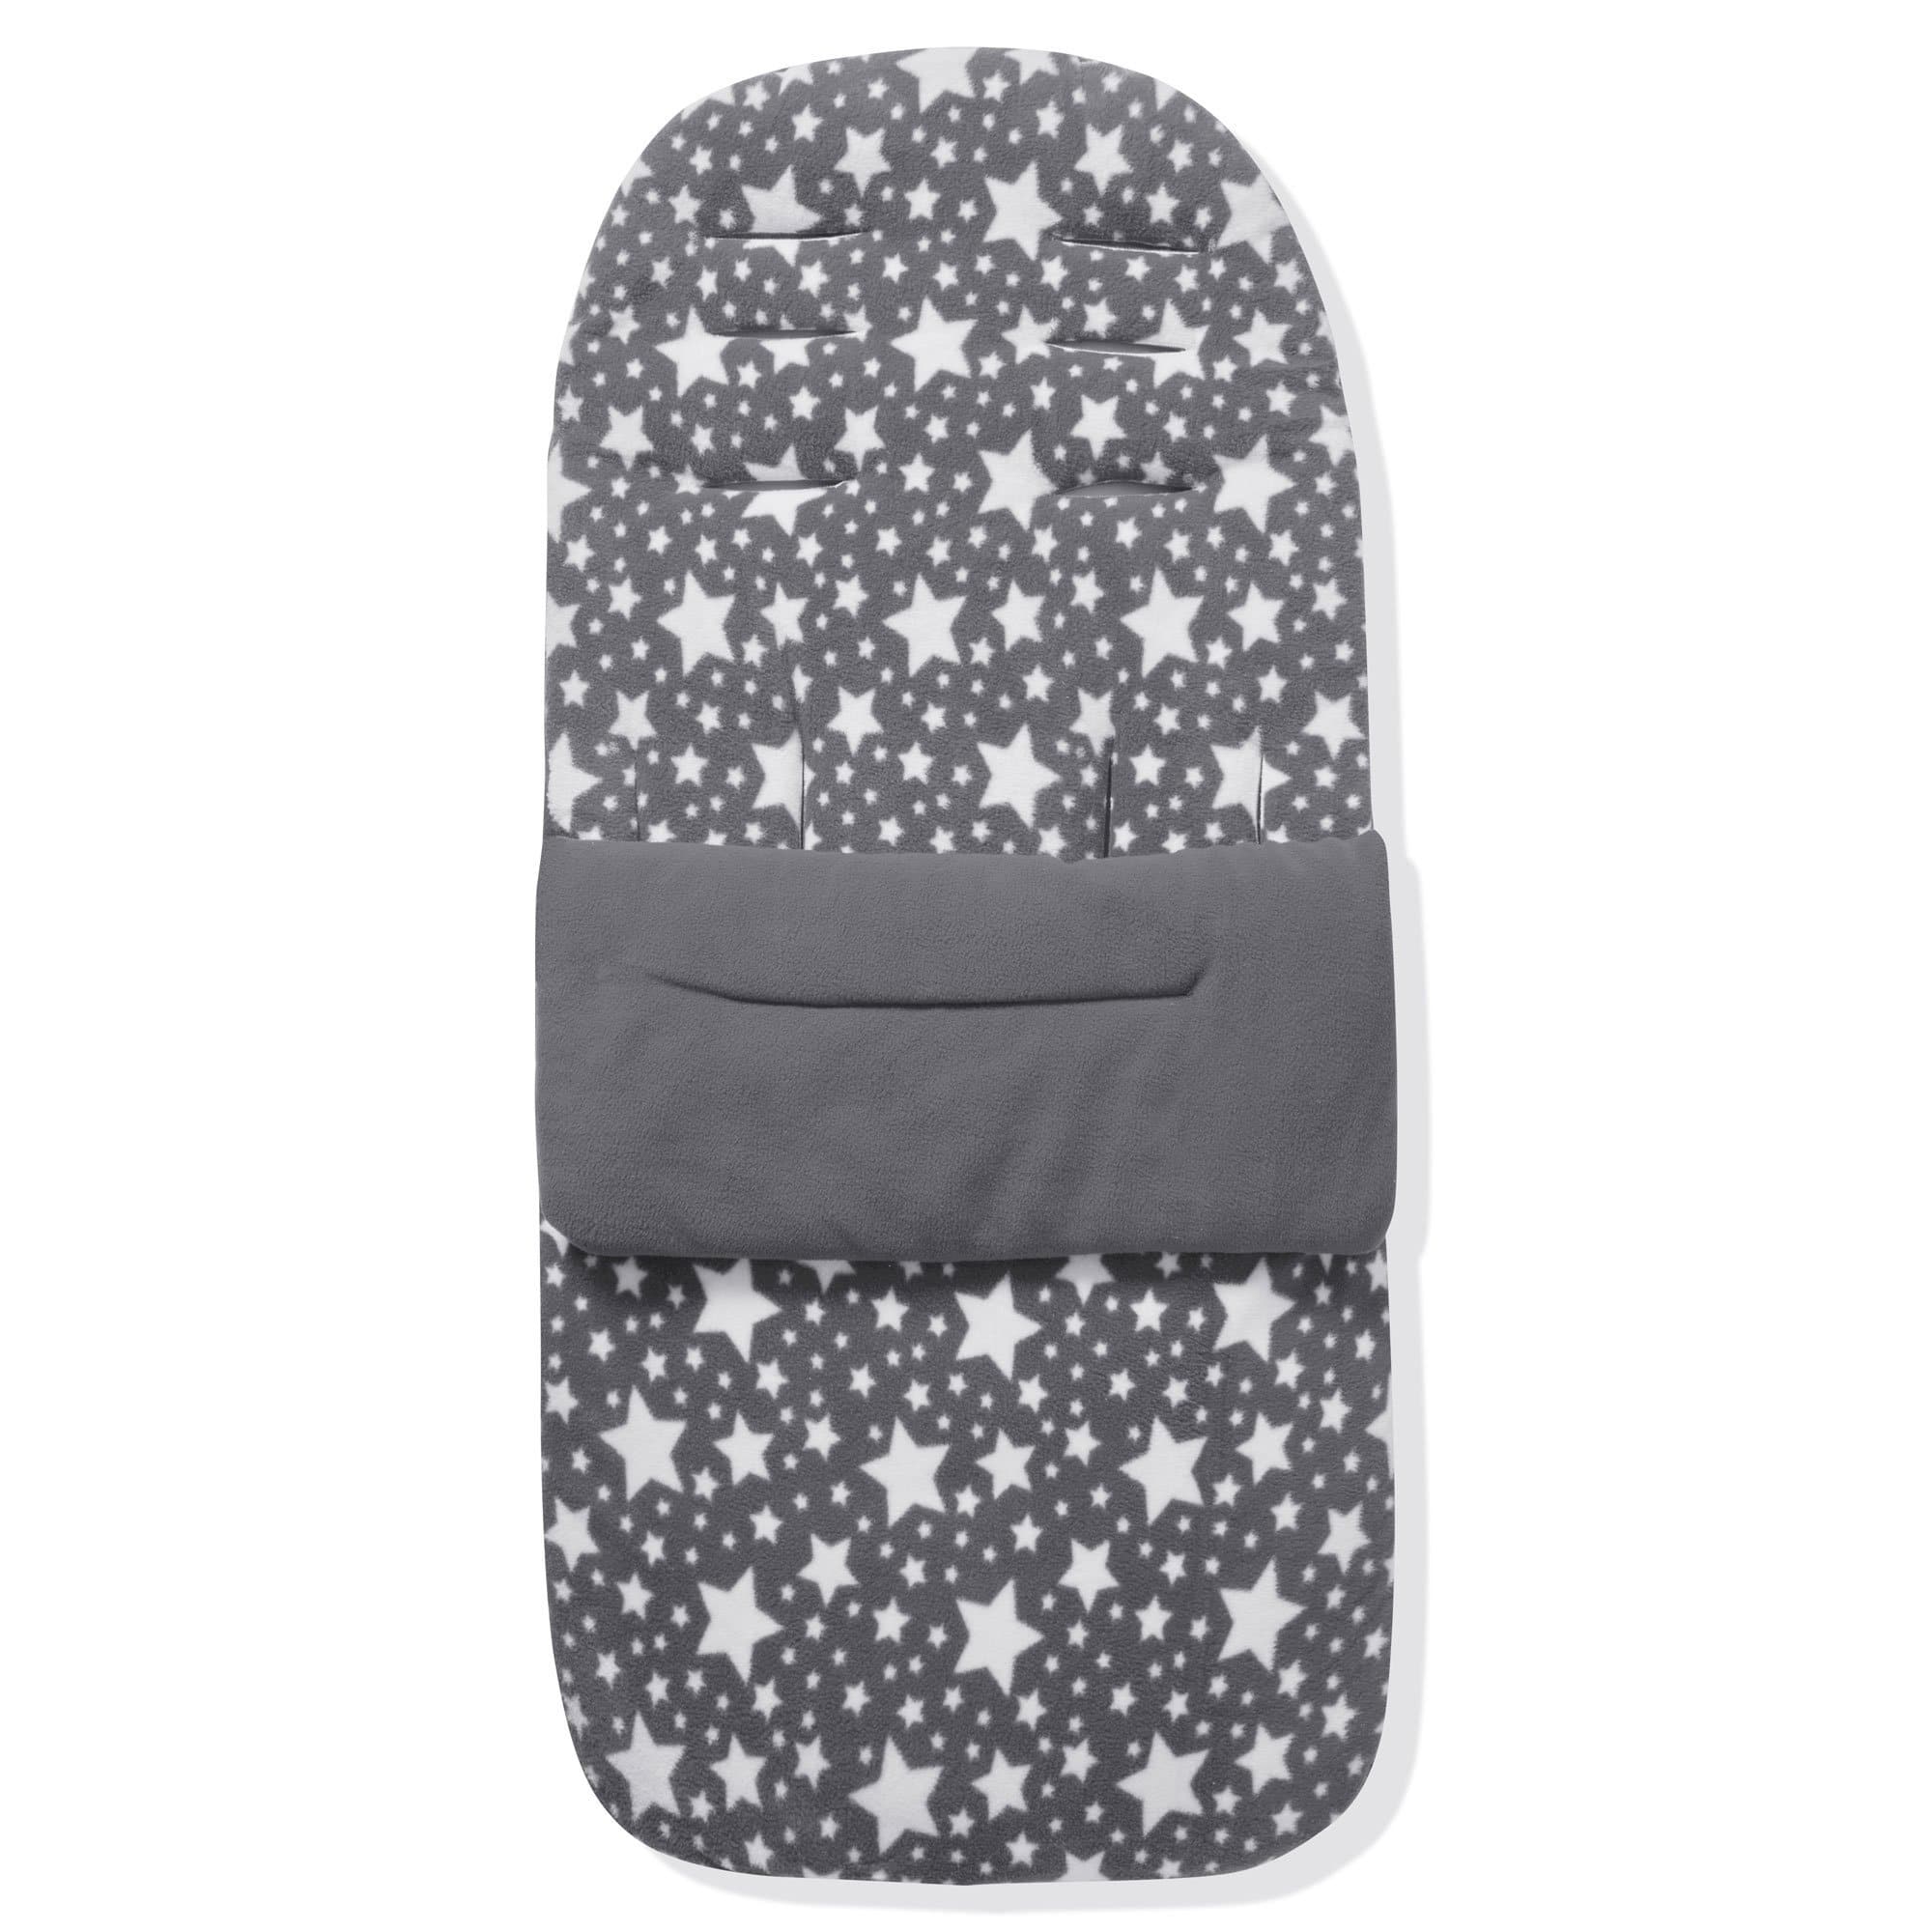 Fleece Footmuff / Cosy Toes Compatible with BabyDan - For Your Little One